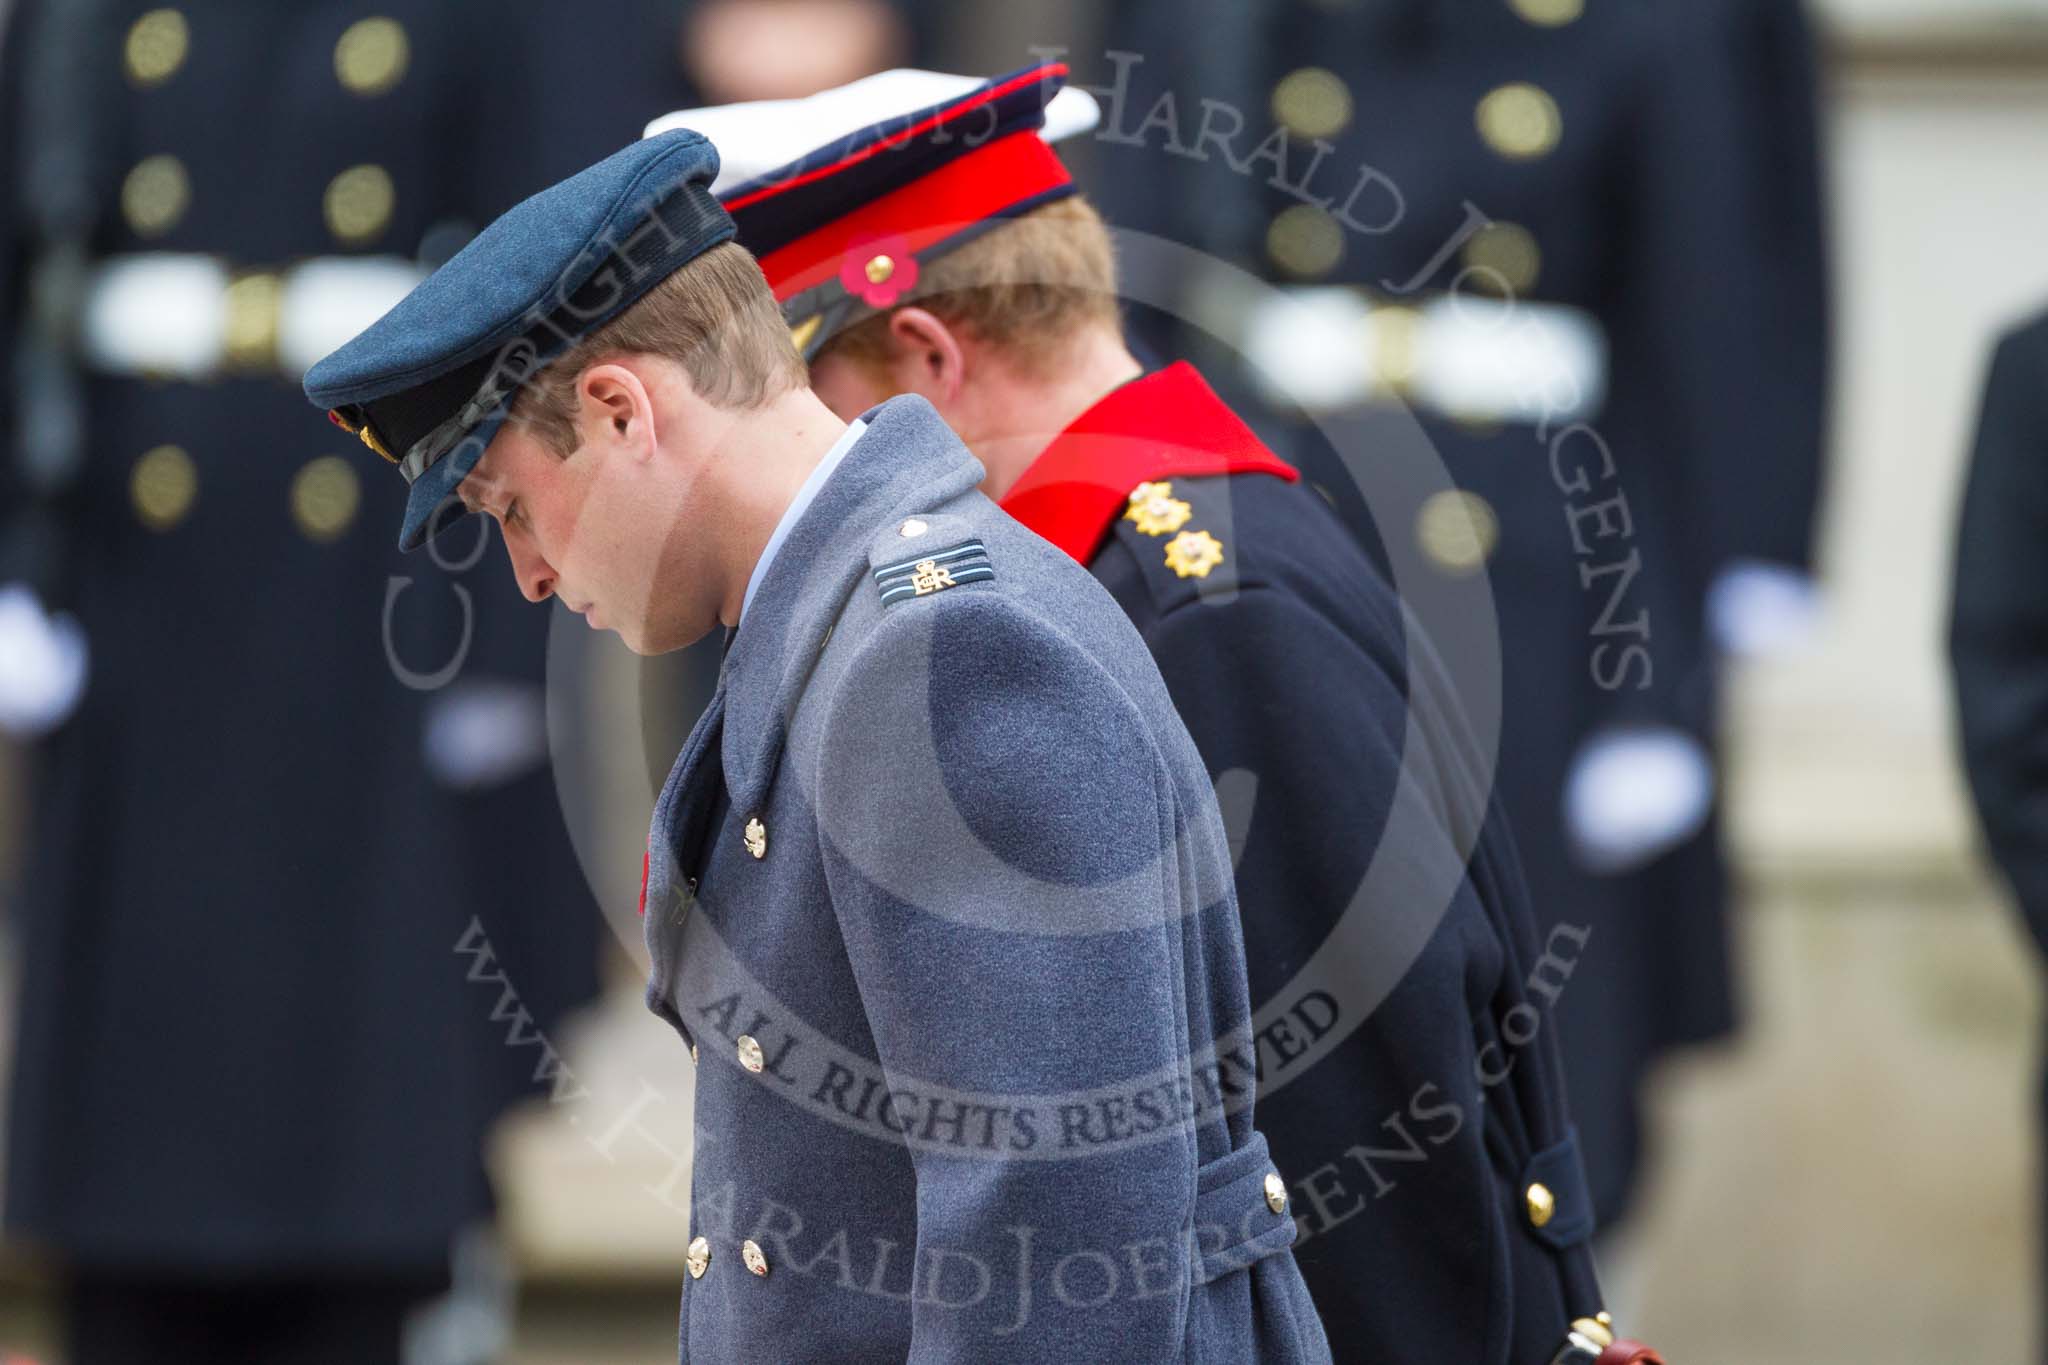 Remembrance Sunday at the Cenotaph 2015: HRH The Duke of Cambridge, HRH Prince Harry, and HRH The Duke of York after laying their wreaths at the Cenotaph. Image #193, 08 November 2015 11:05 Whitehall, London, UK